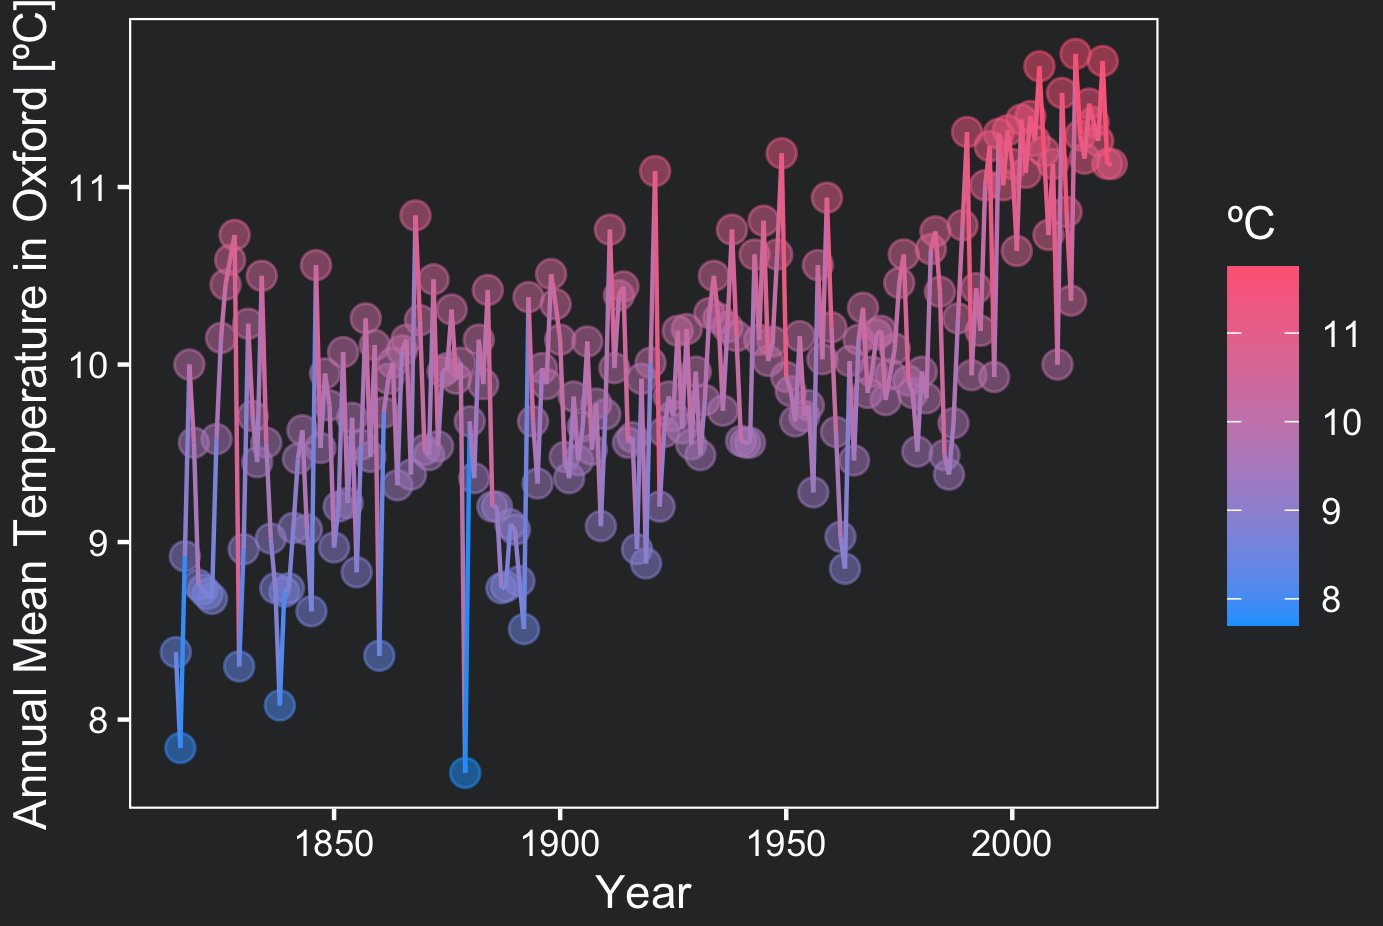 Climate data plot with the addition of a second geom layer in ggplot2 